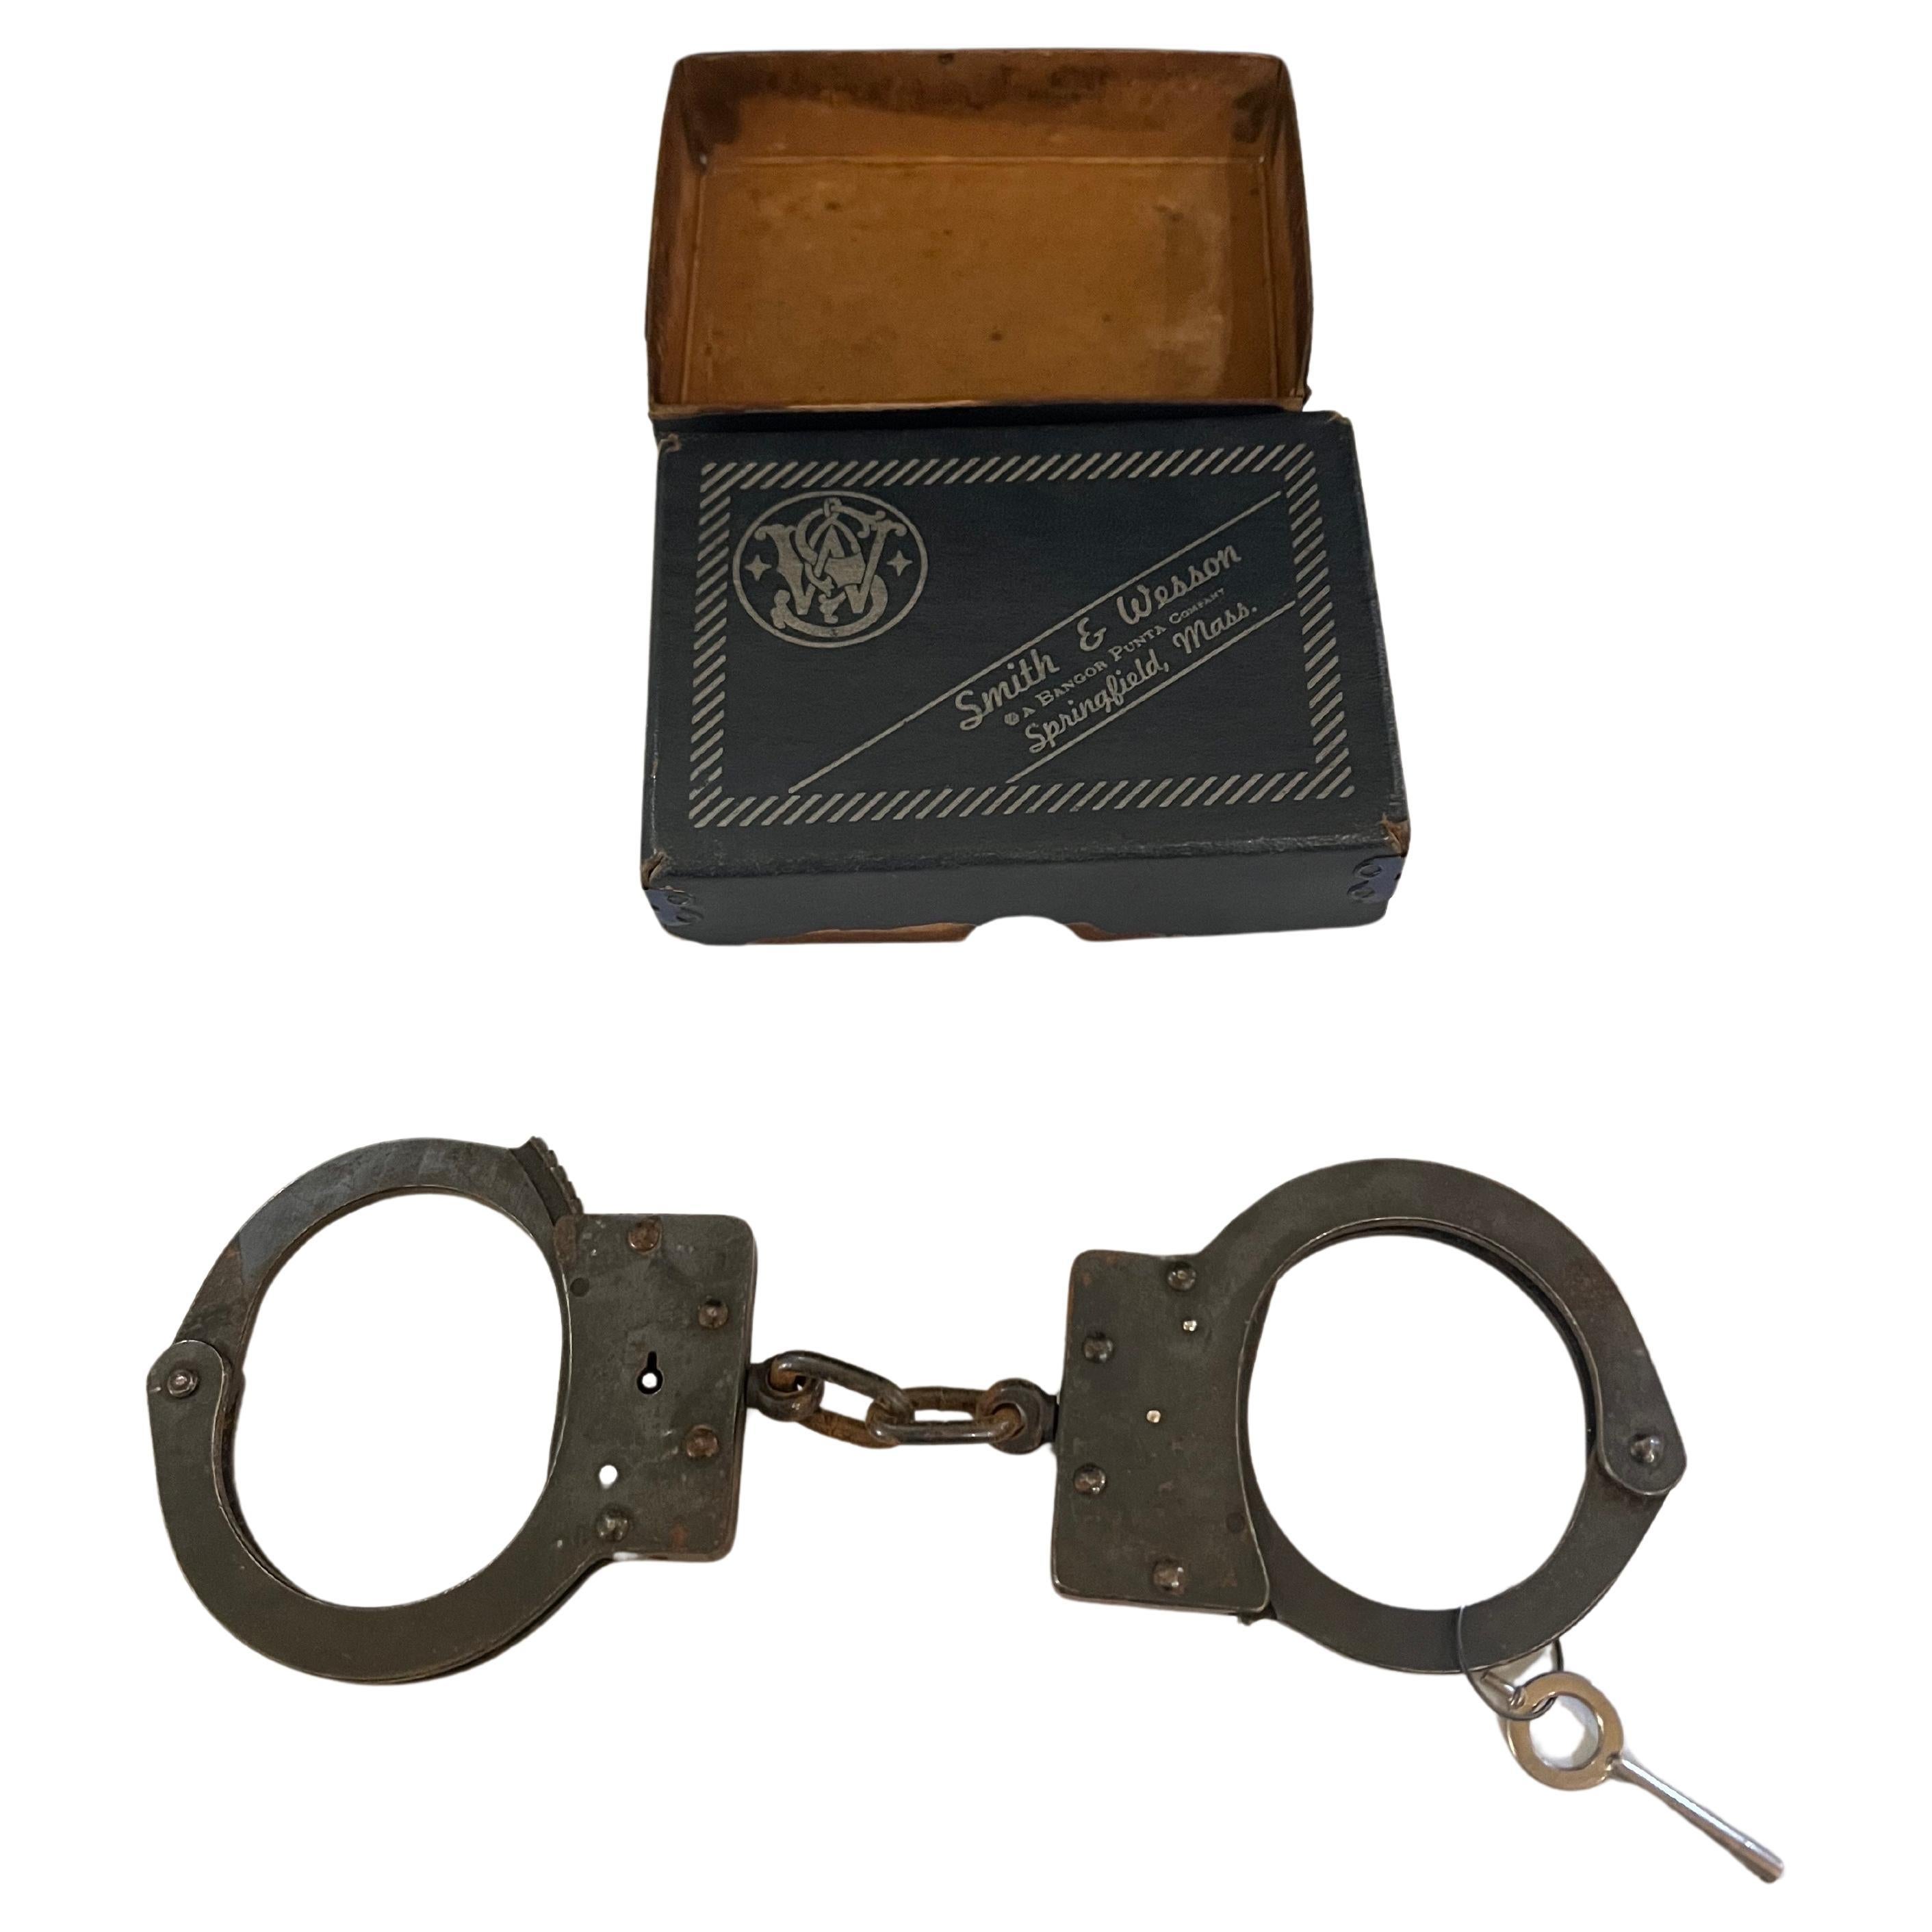 A very rare and collectible art Deco pair of handcuffs model 926, in its original box hard to find item.